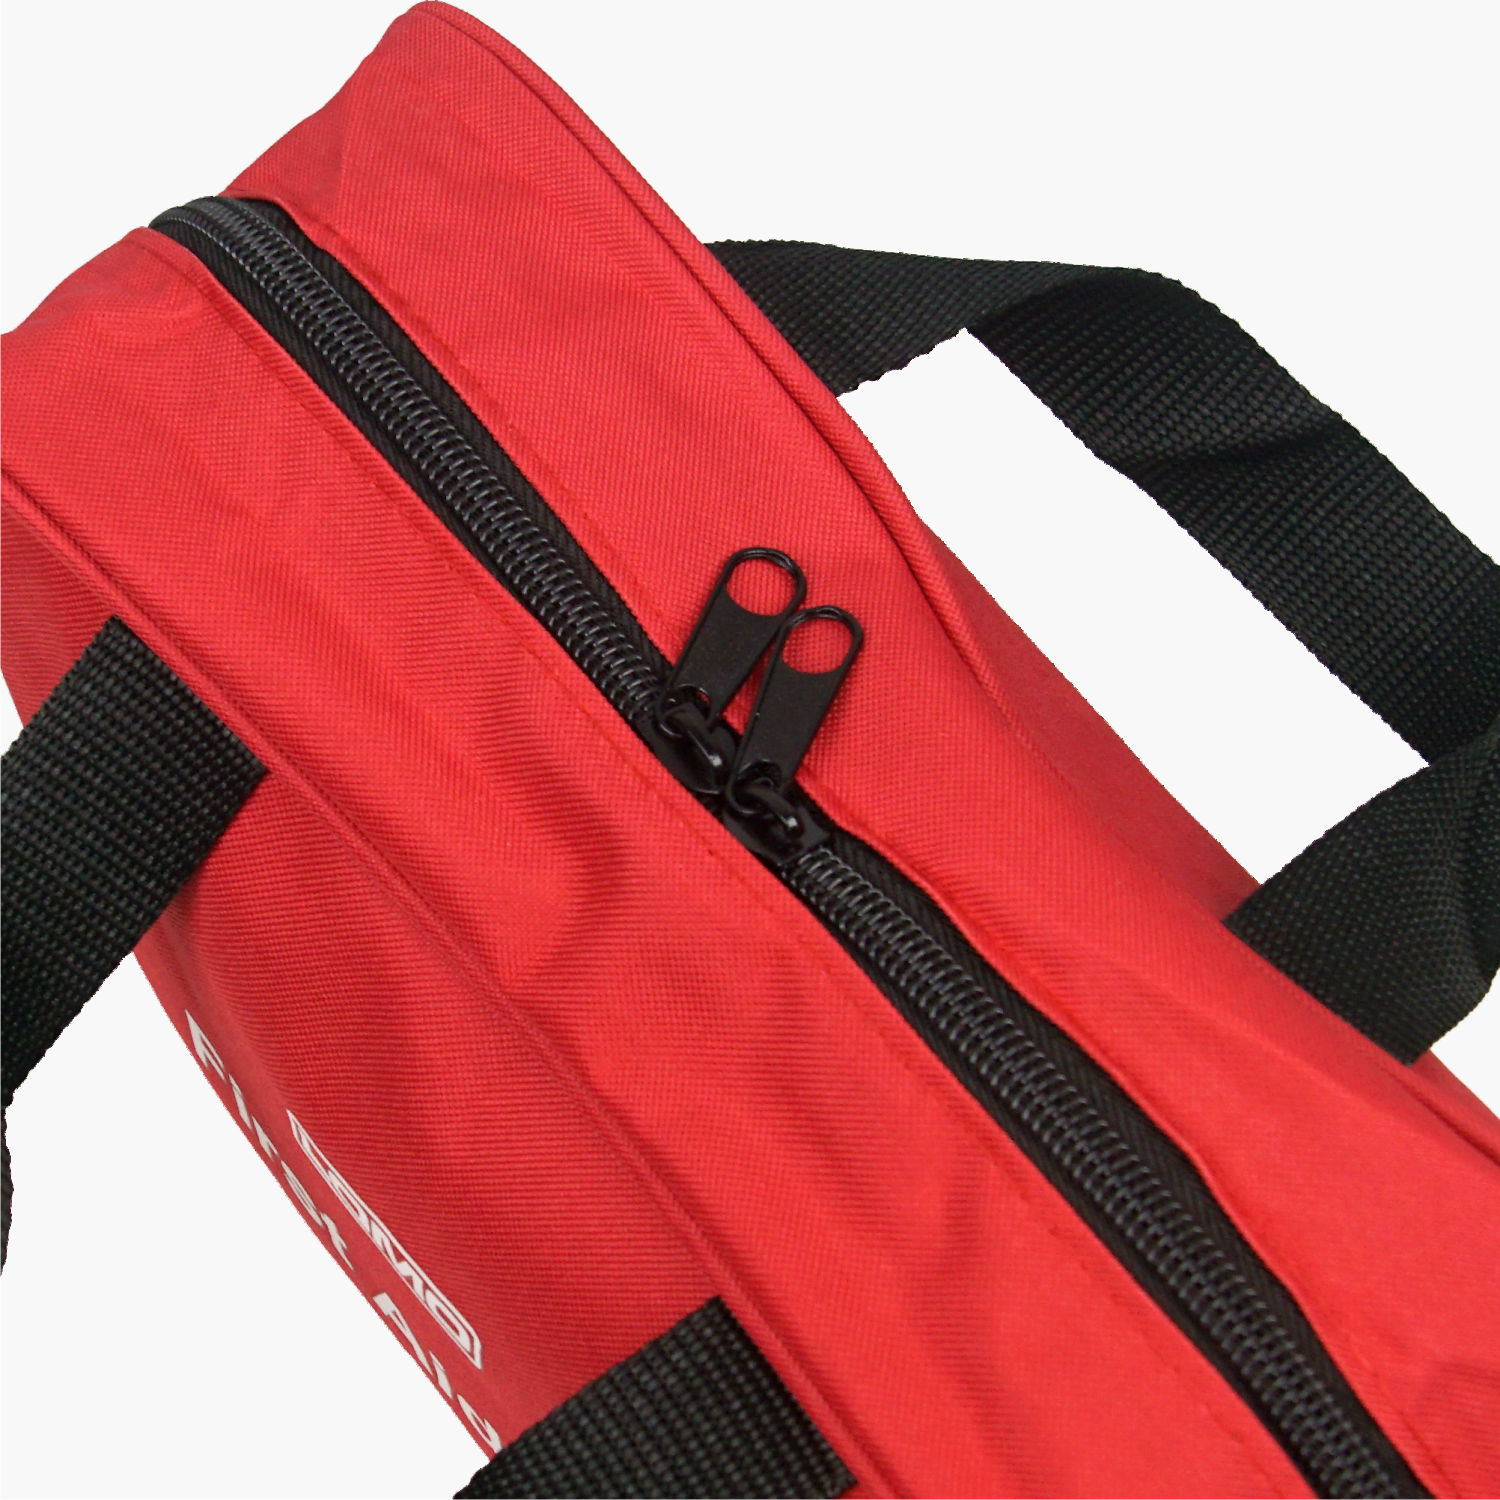 TOOL EMERGENCY BOAT KIT  Accessories Spares Centre